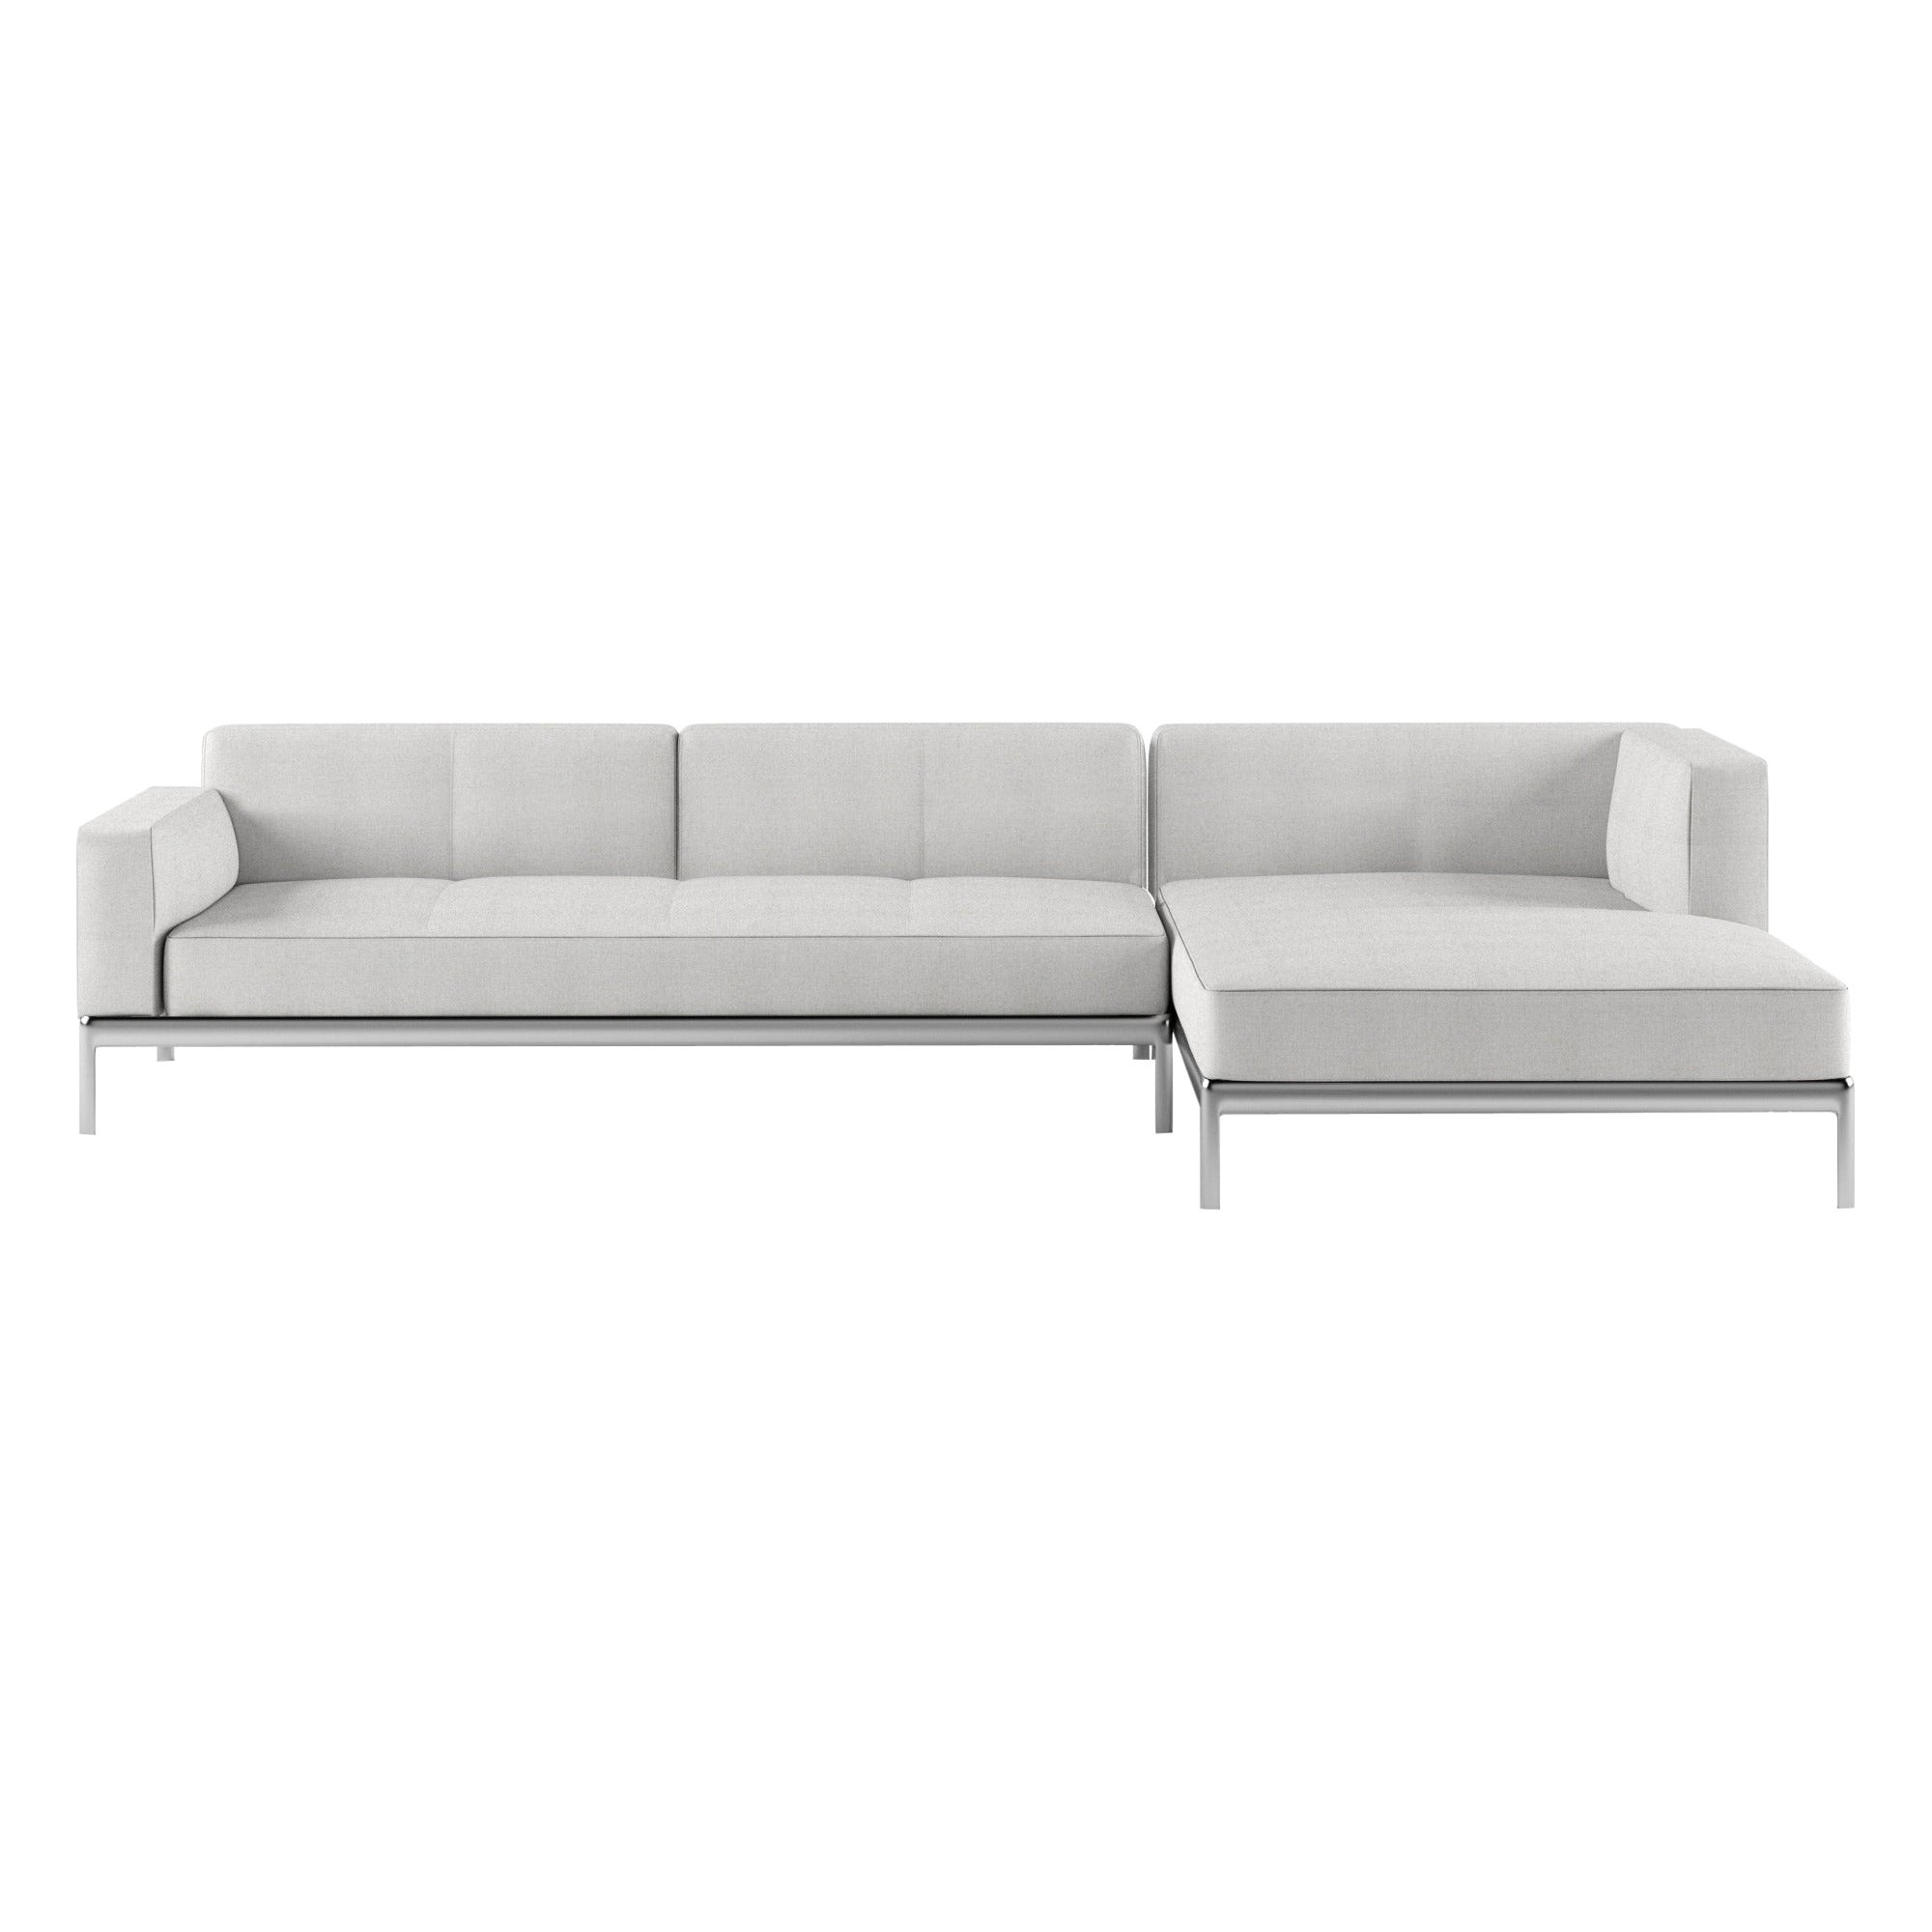 Alias P06+P05 AluZen Sectional Sofa in Upholstery with Polished Aluminium Frame